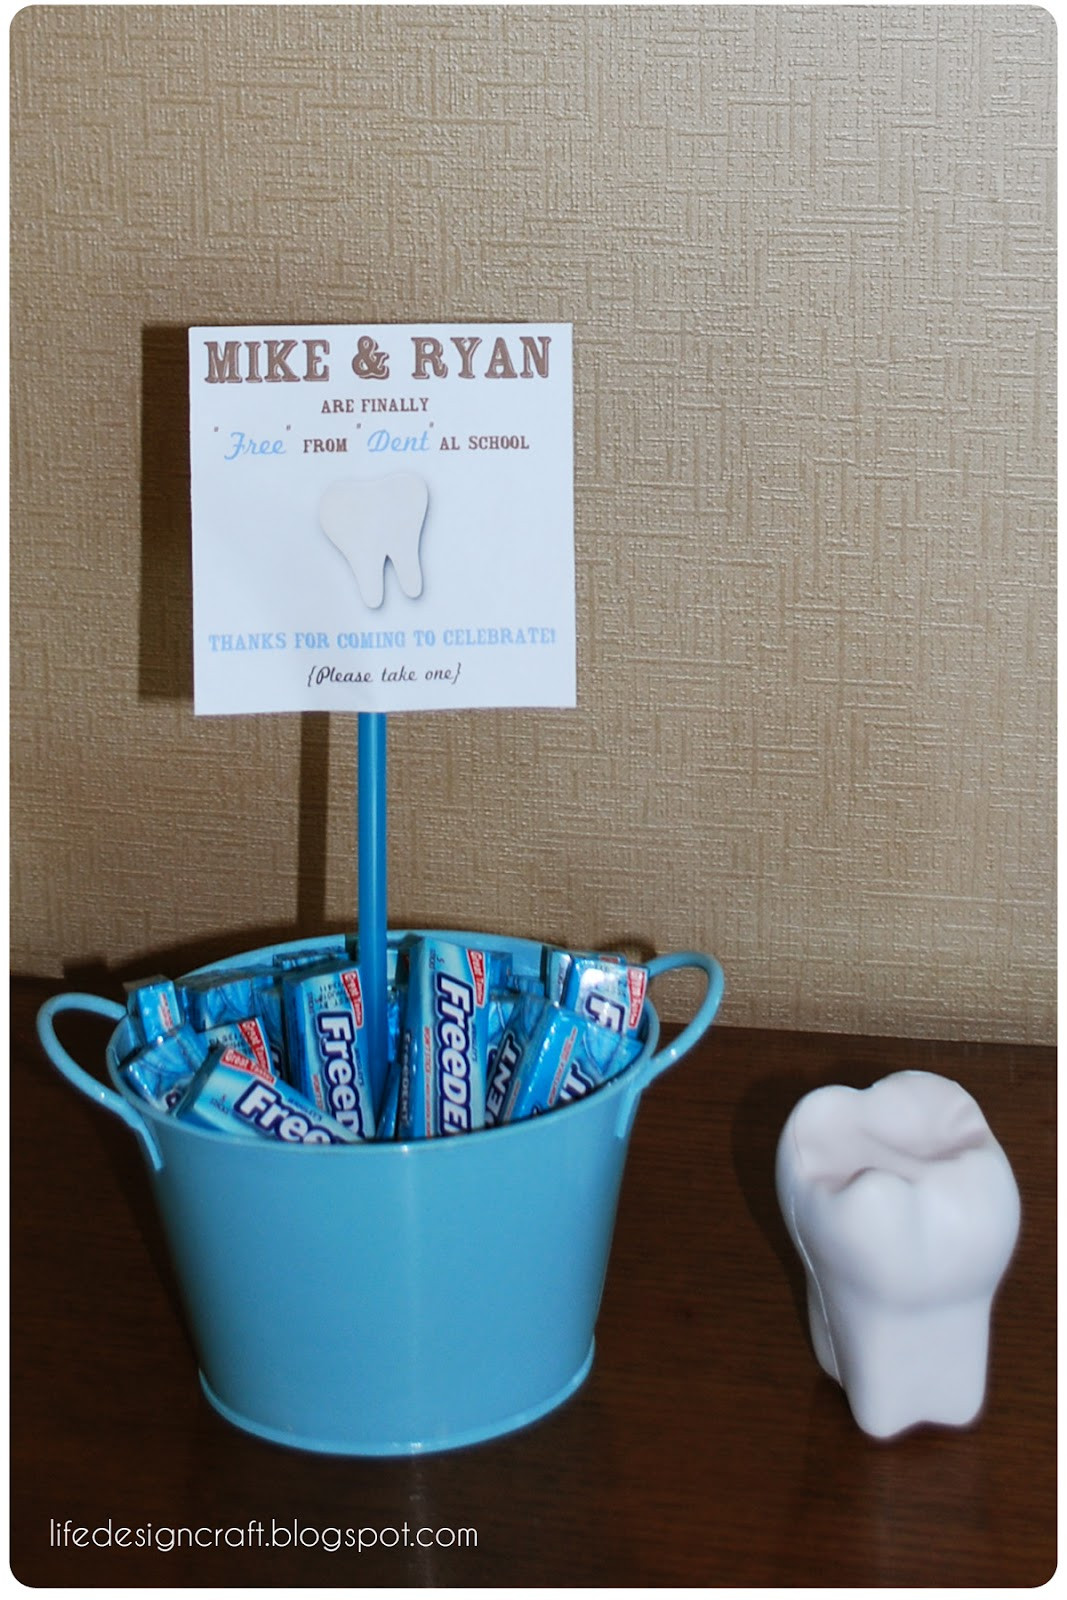 Dentist Graduation Party Ideas
 Life Design and the Pursuit of Craftiness Dental School